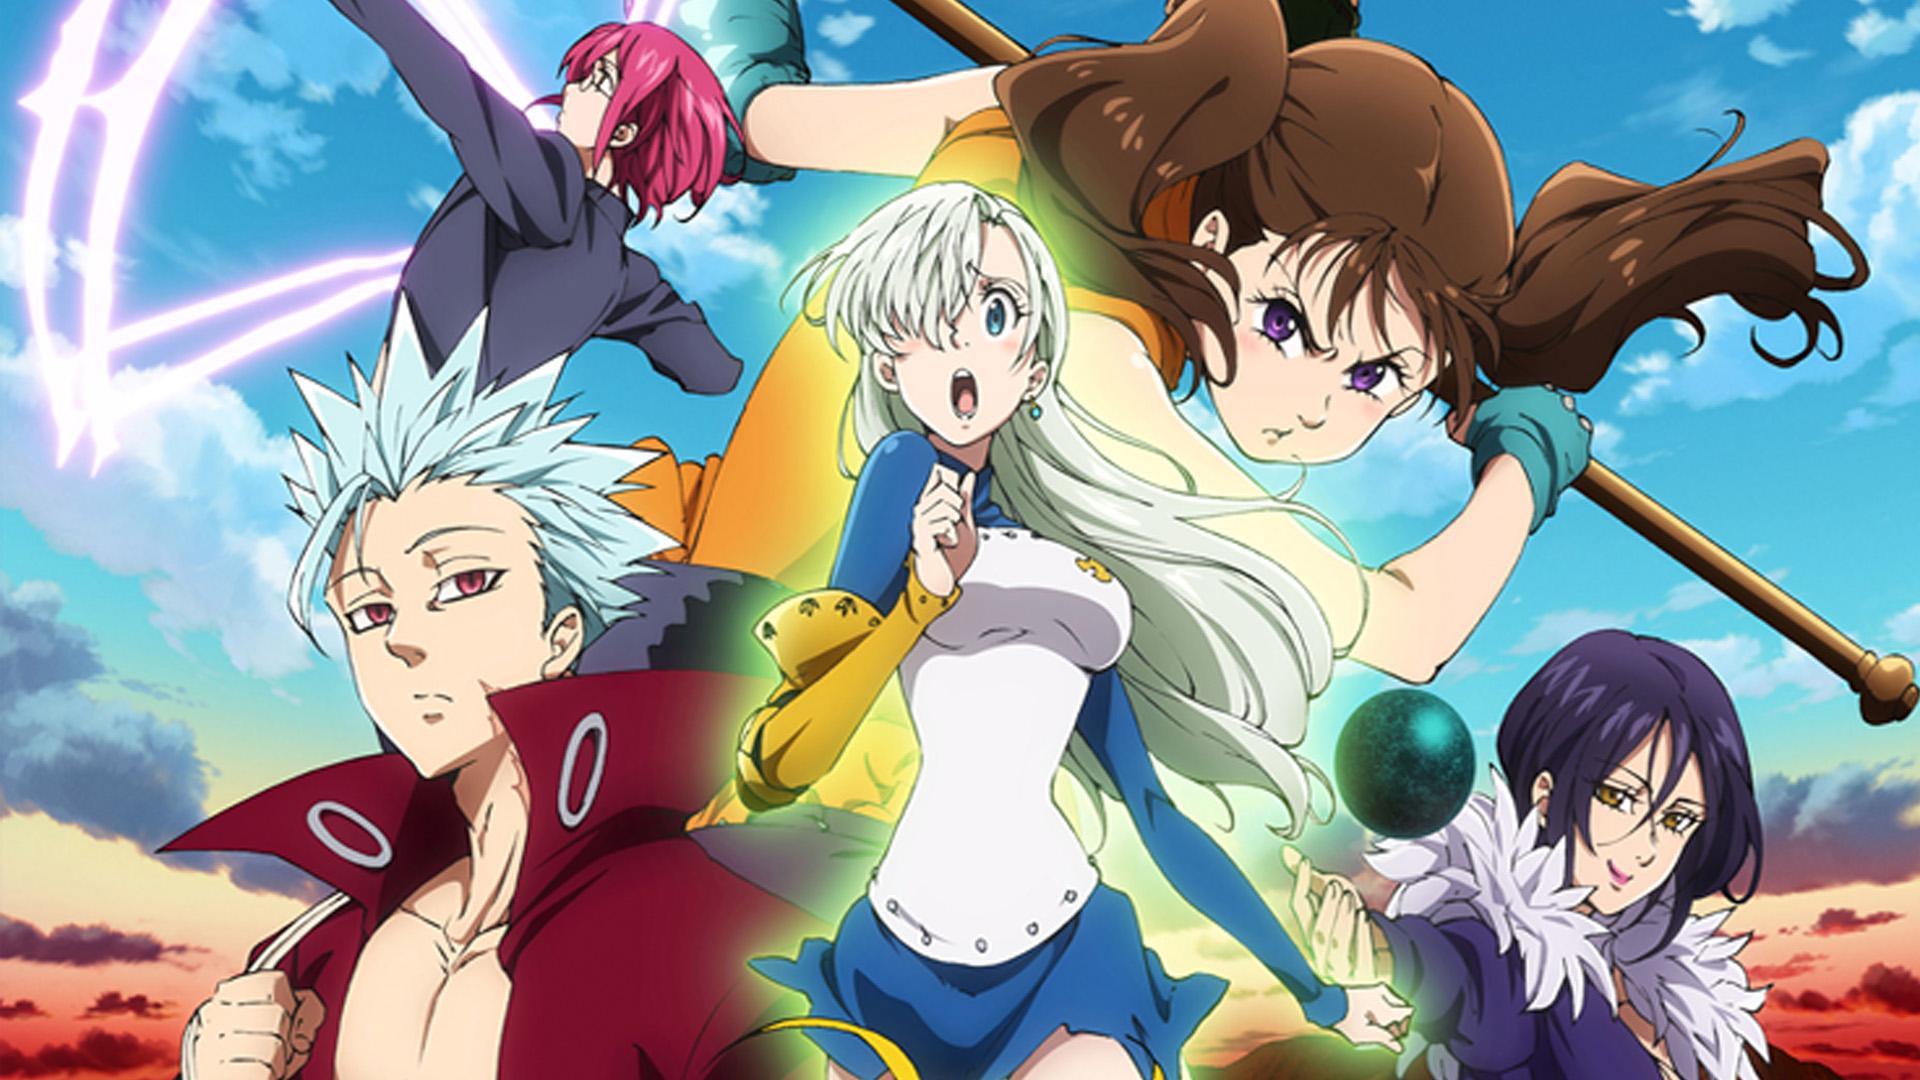 The Seven Deadly Sins Revival Of The Commandments Hd Wallpaper 4k For Pc, The Seven Deadly Sins Revival Of The Commandments, Anime